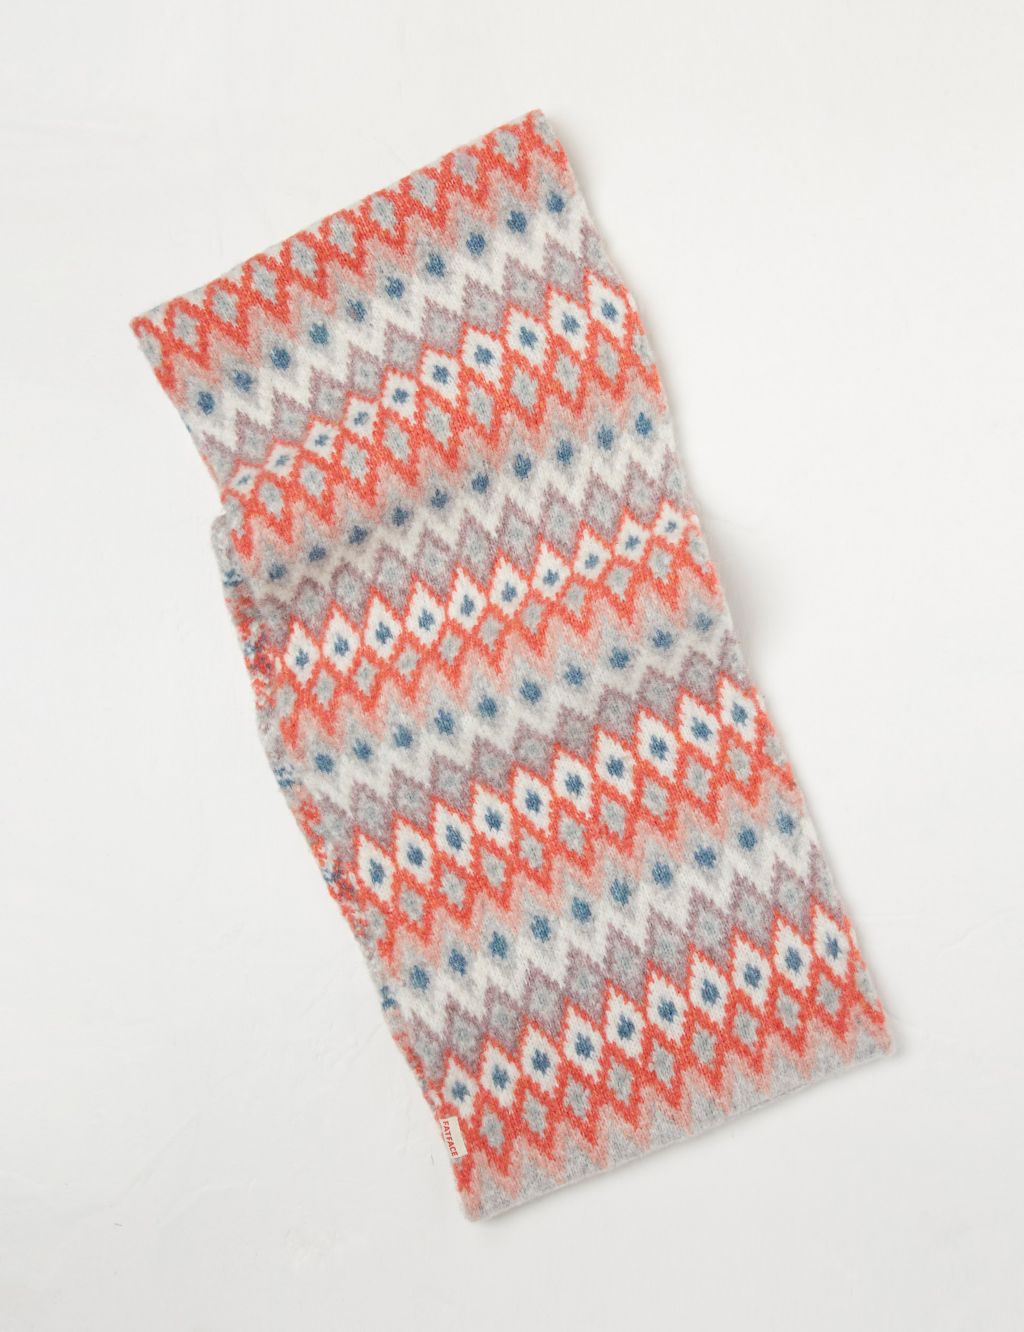 Knitted Fair Isle Snood with Wool image 2